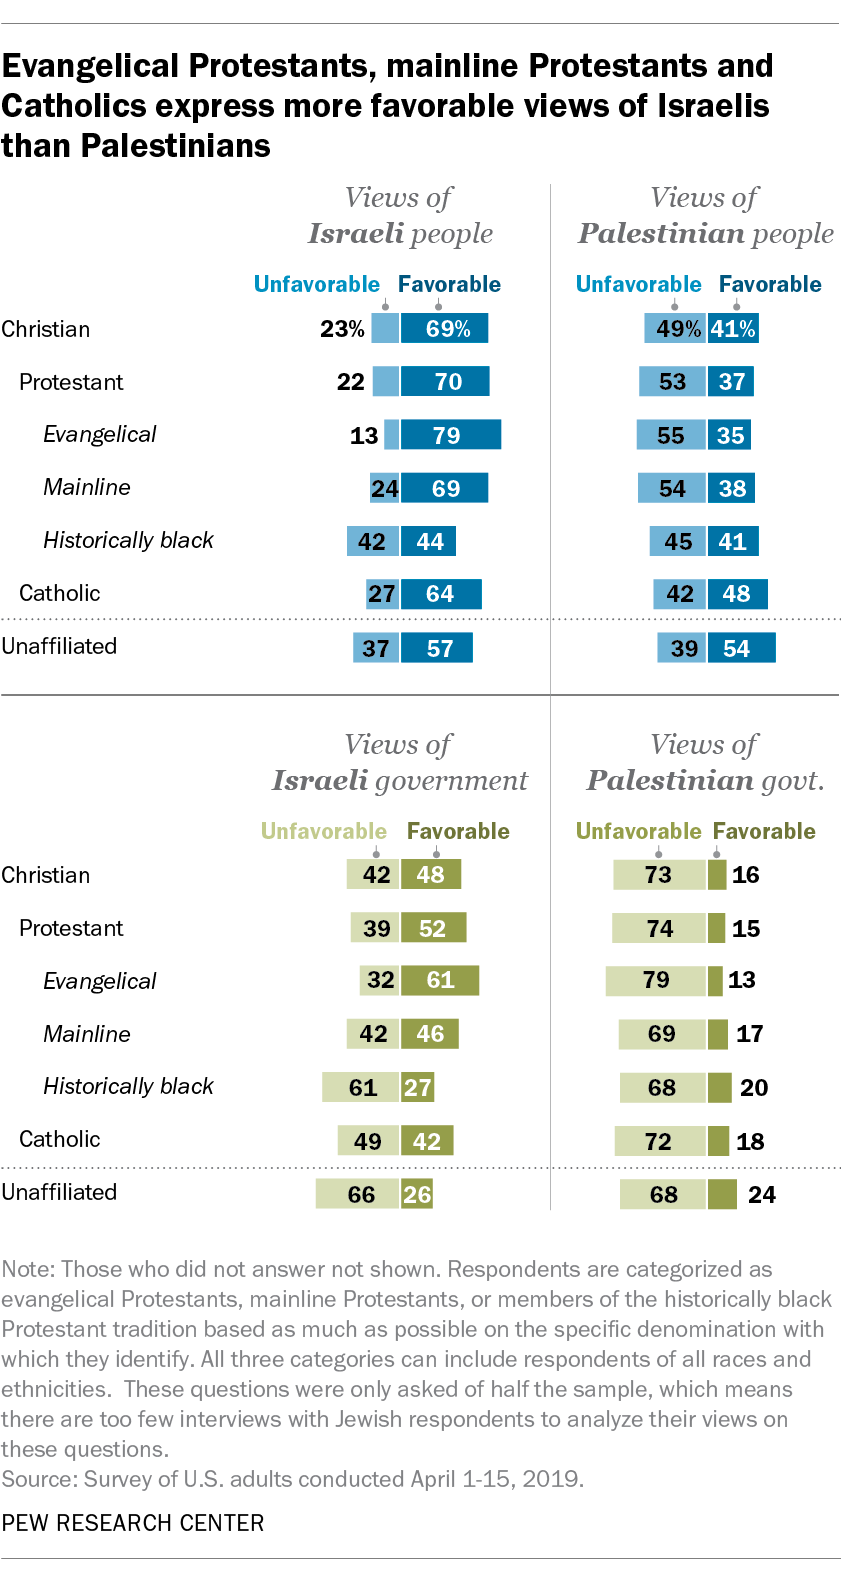 Evangelical Protestants, mainline Protestants and Catholics express more favorable views of Israelis than Palestinians